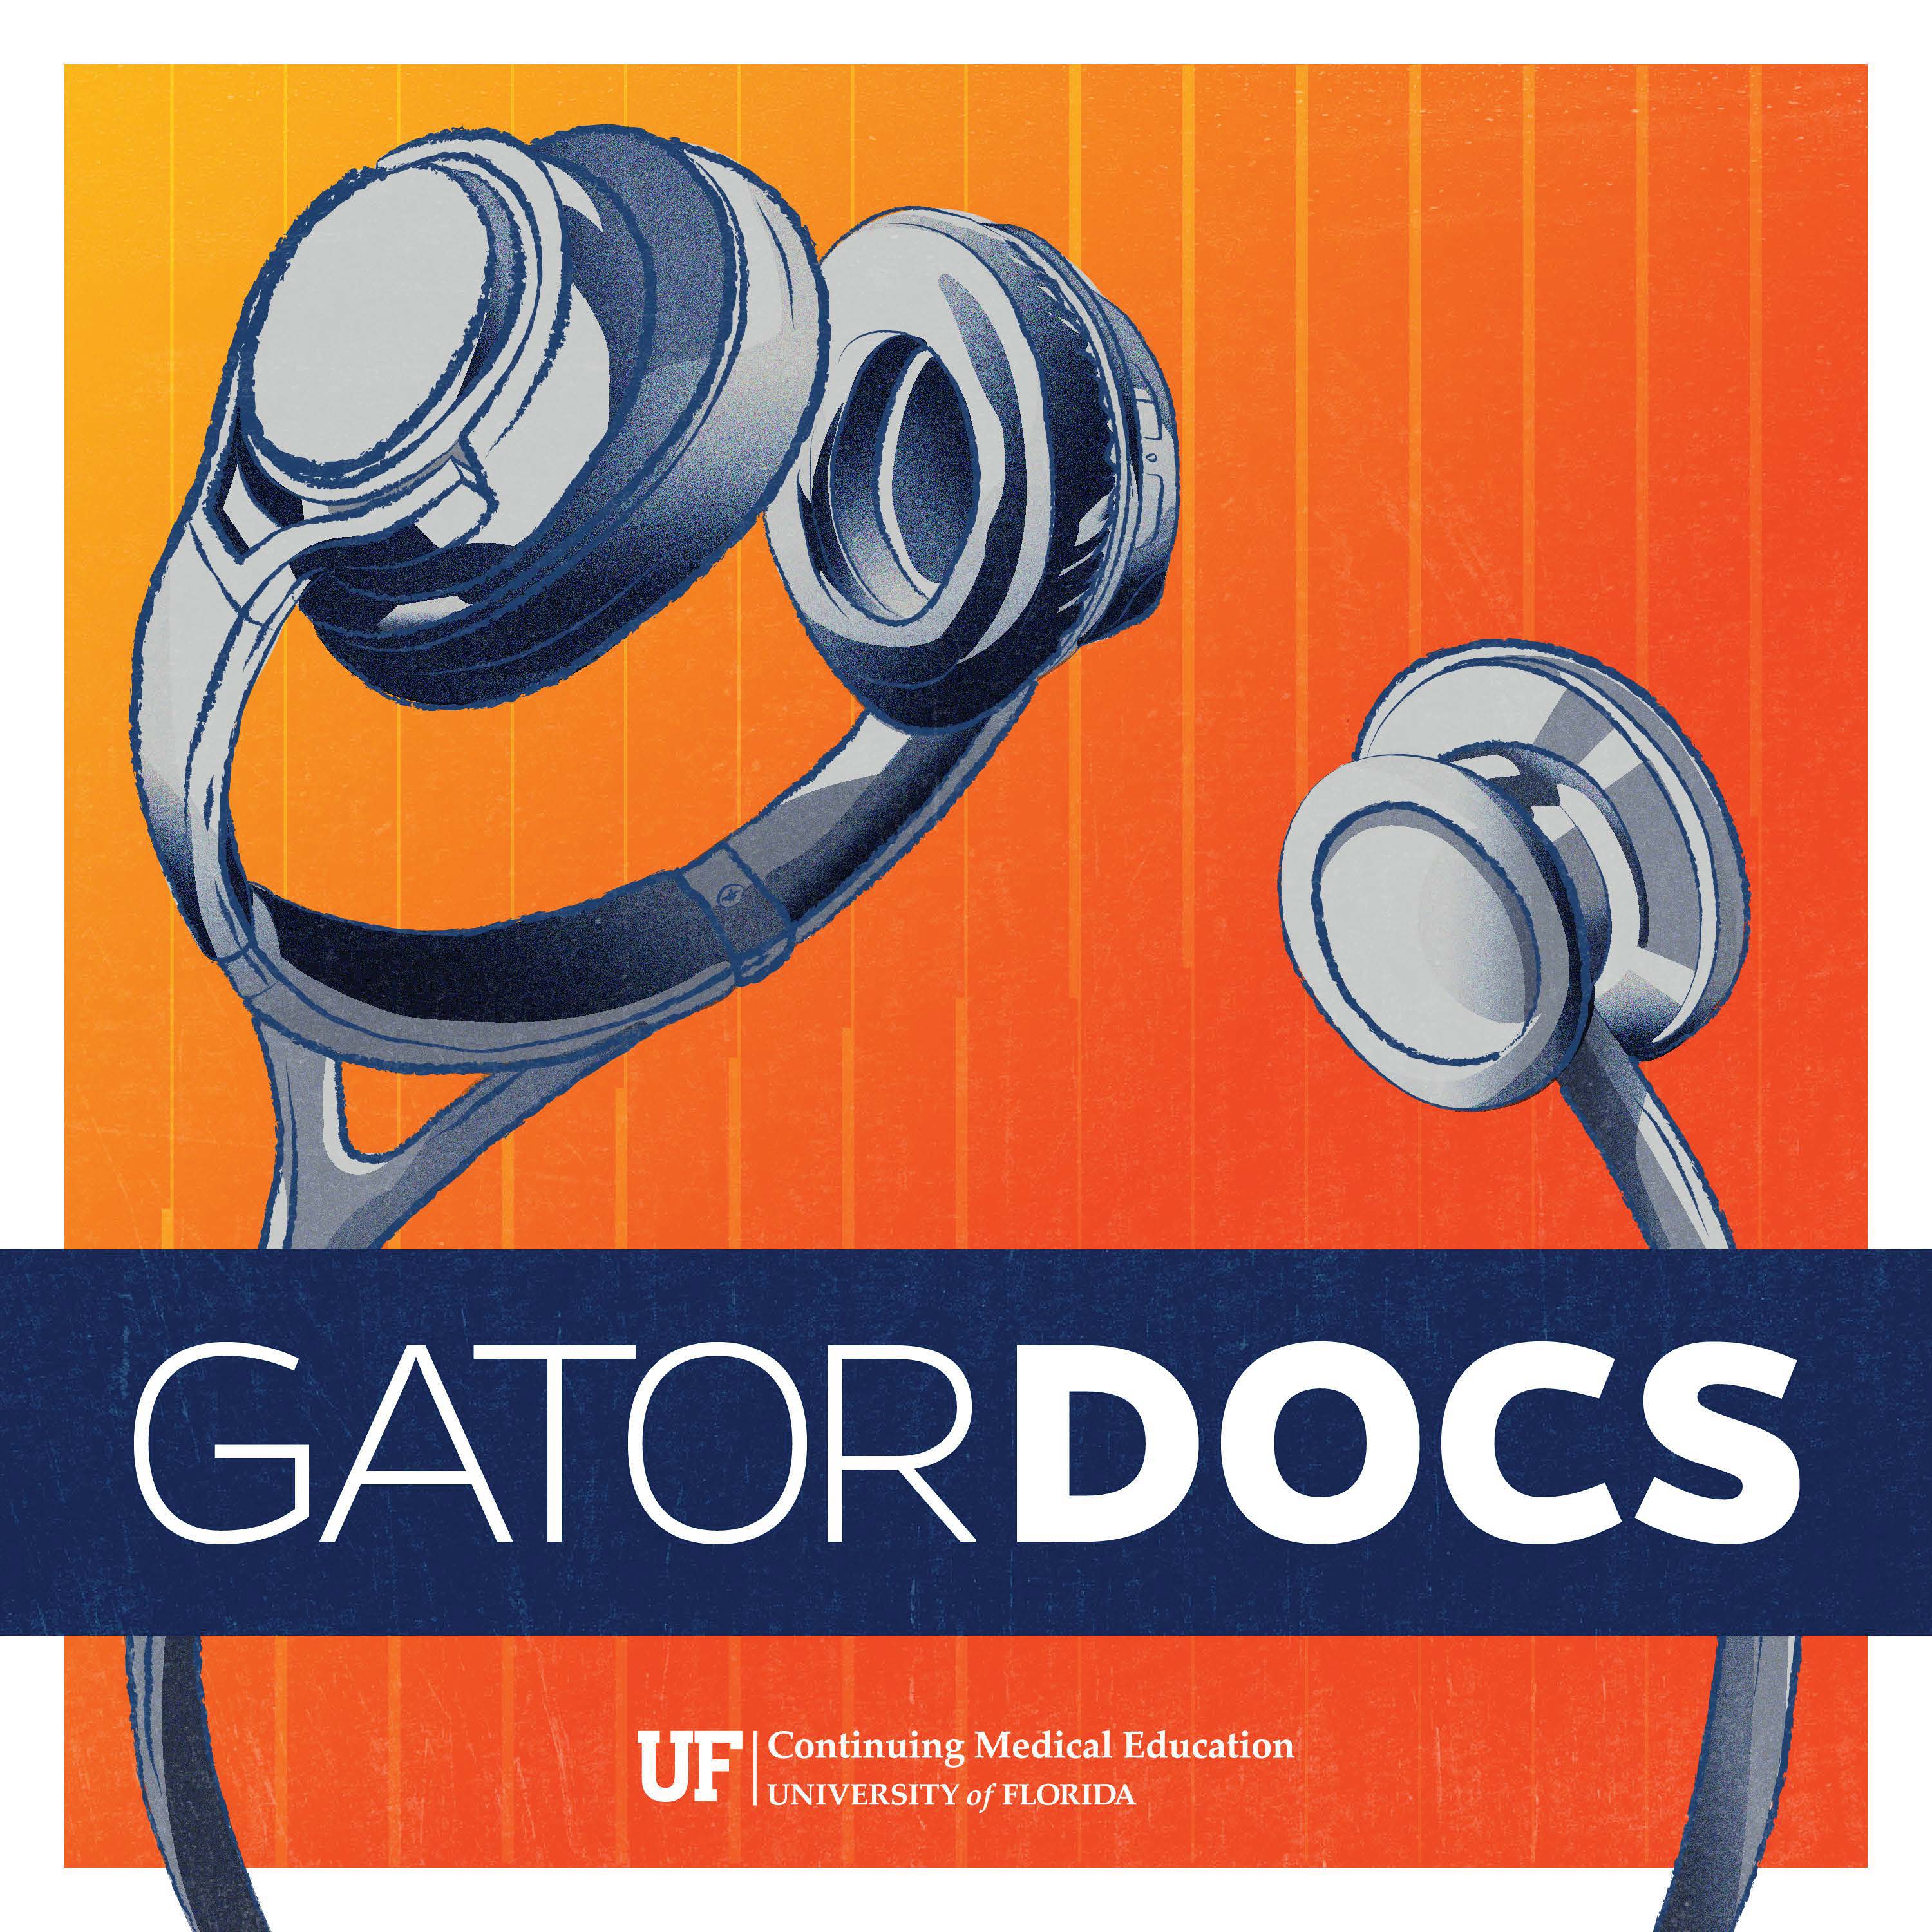 GatorDocs Episode 1: Post-Traumatic Stress Disorder and Research on Brain Injury Banner